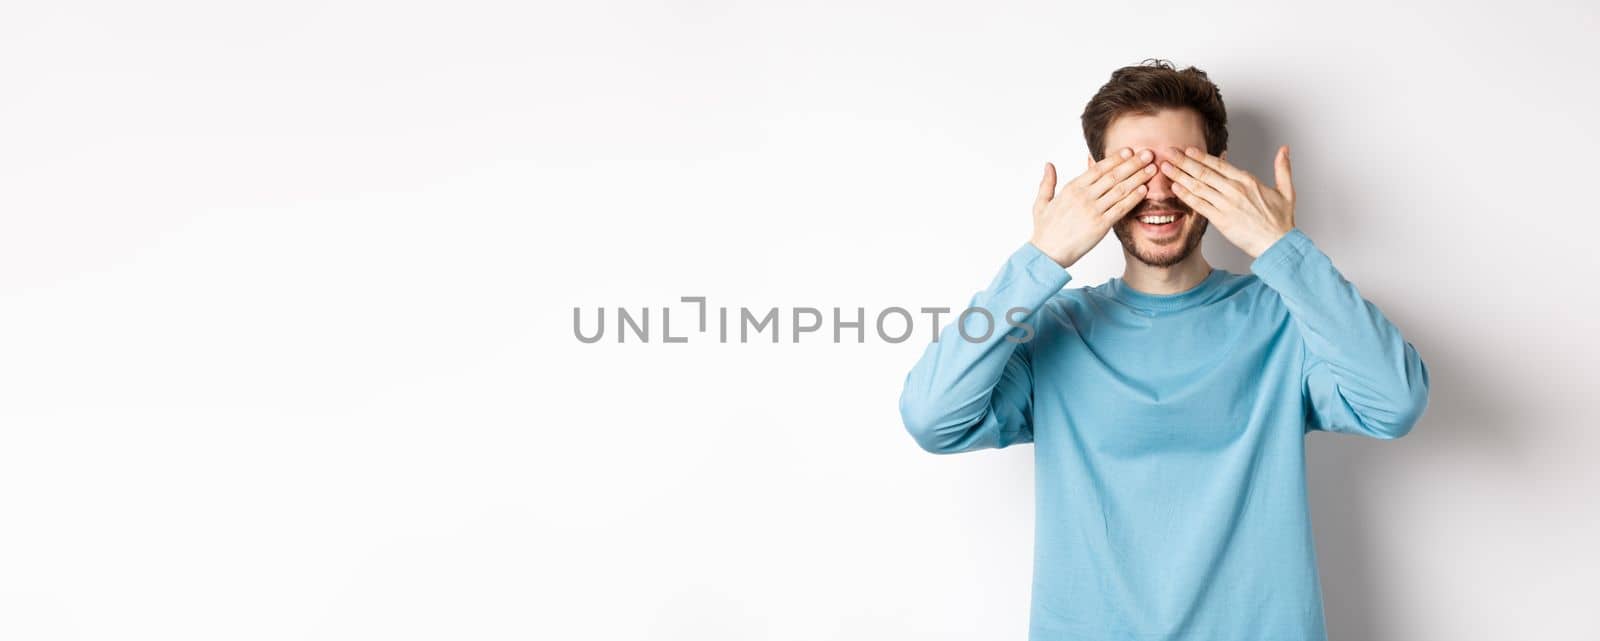 Smiling caucasian man waiting for surprise with closed eyes, expect gift, standing over white background. Celebration and holidays concept.